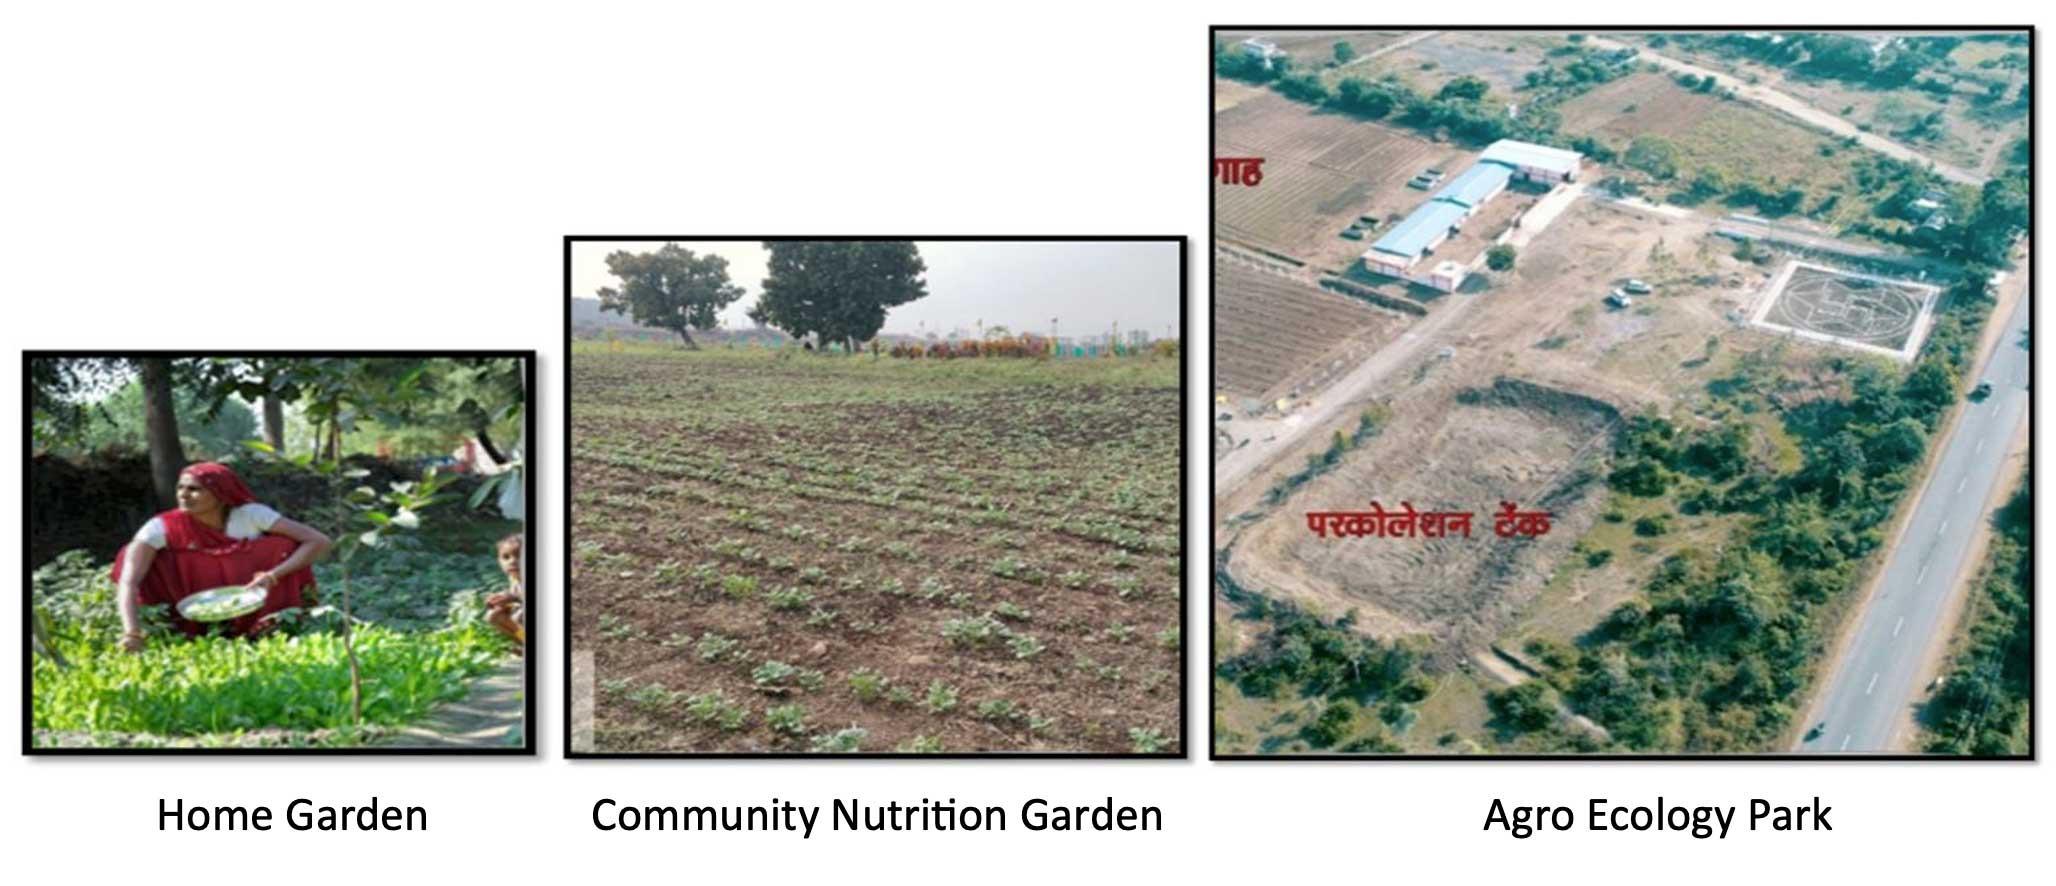 Fig:1 These agro-ecological farming sites are organized in three models